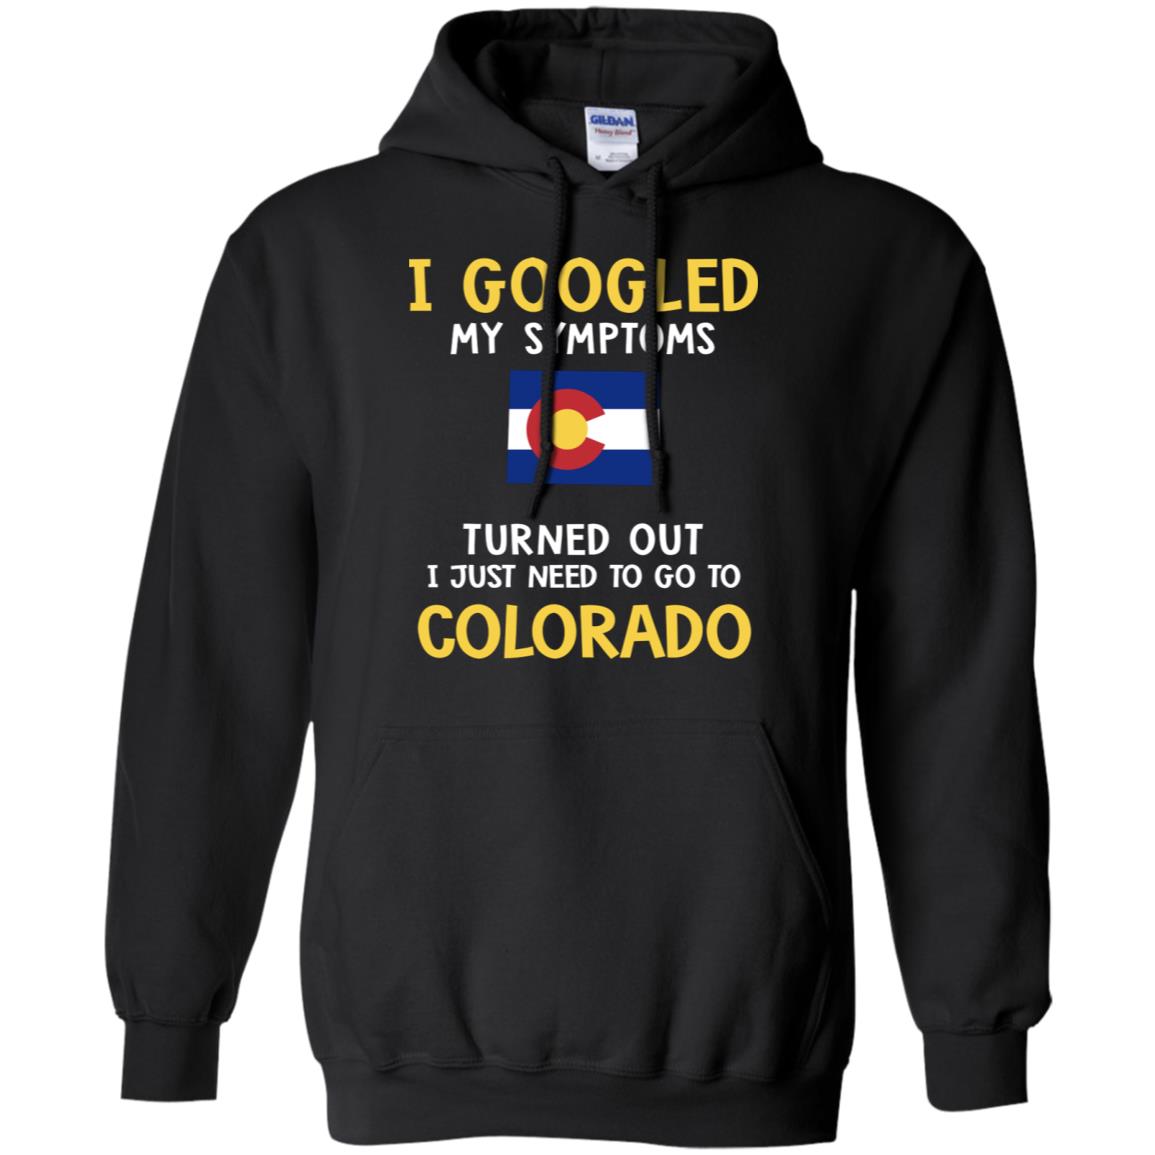 Colorado Hoodie Turned Out I Just Need To Go To Colorado - Hoodie Teezalo